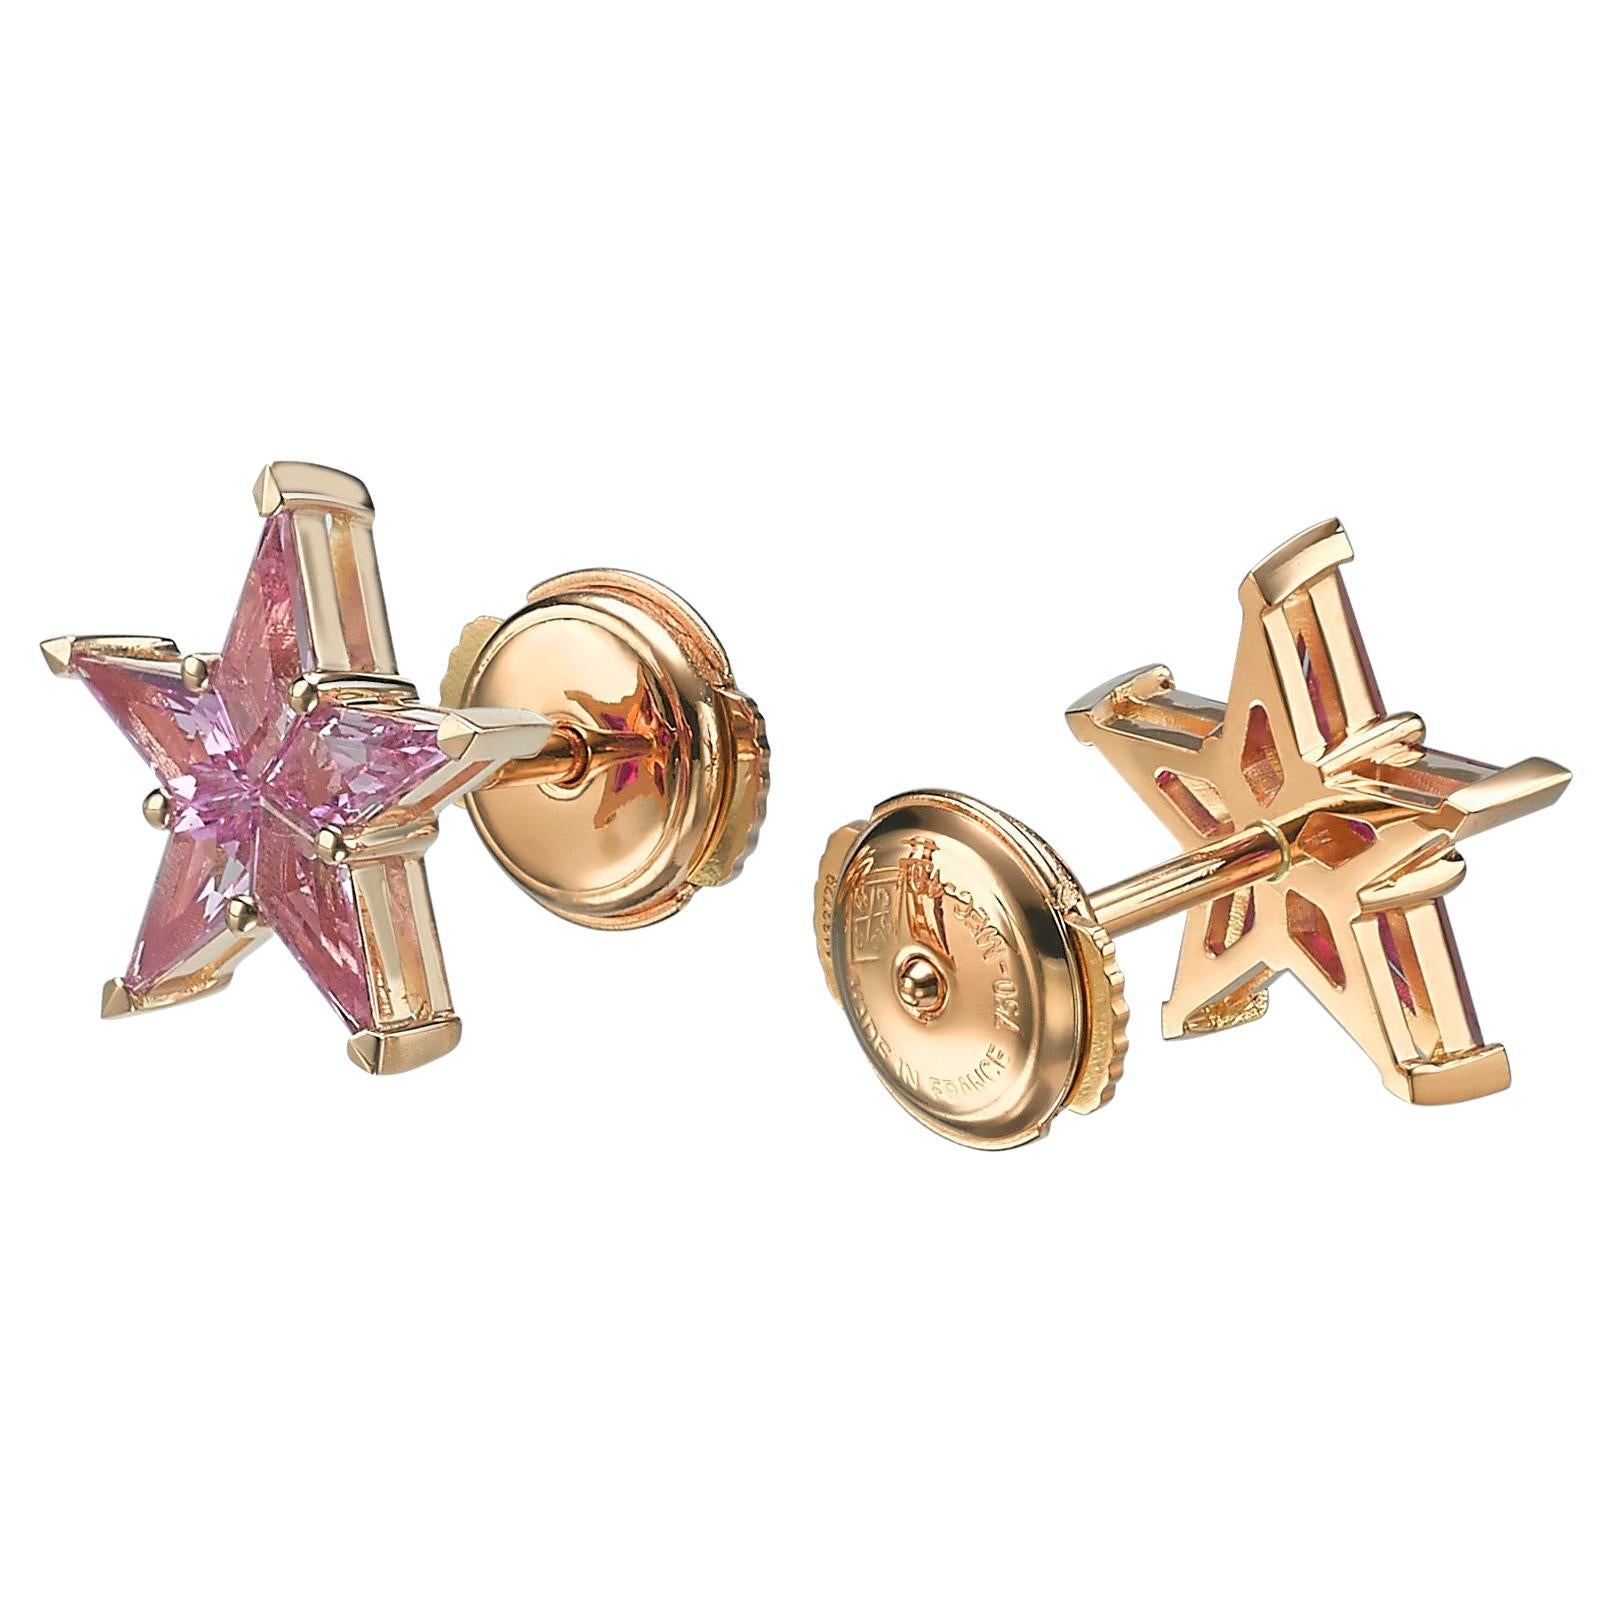 Alex Kou pink sapphire star stud earrings 18K yellow gold.
Earrings are formed in the form of five-pointed stars.
Earrings weighing 2.65g. 
Earrings are marked Alex Kou.
Gold 18K.
The locks are very comfortable and easy to use.
About the quality of